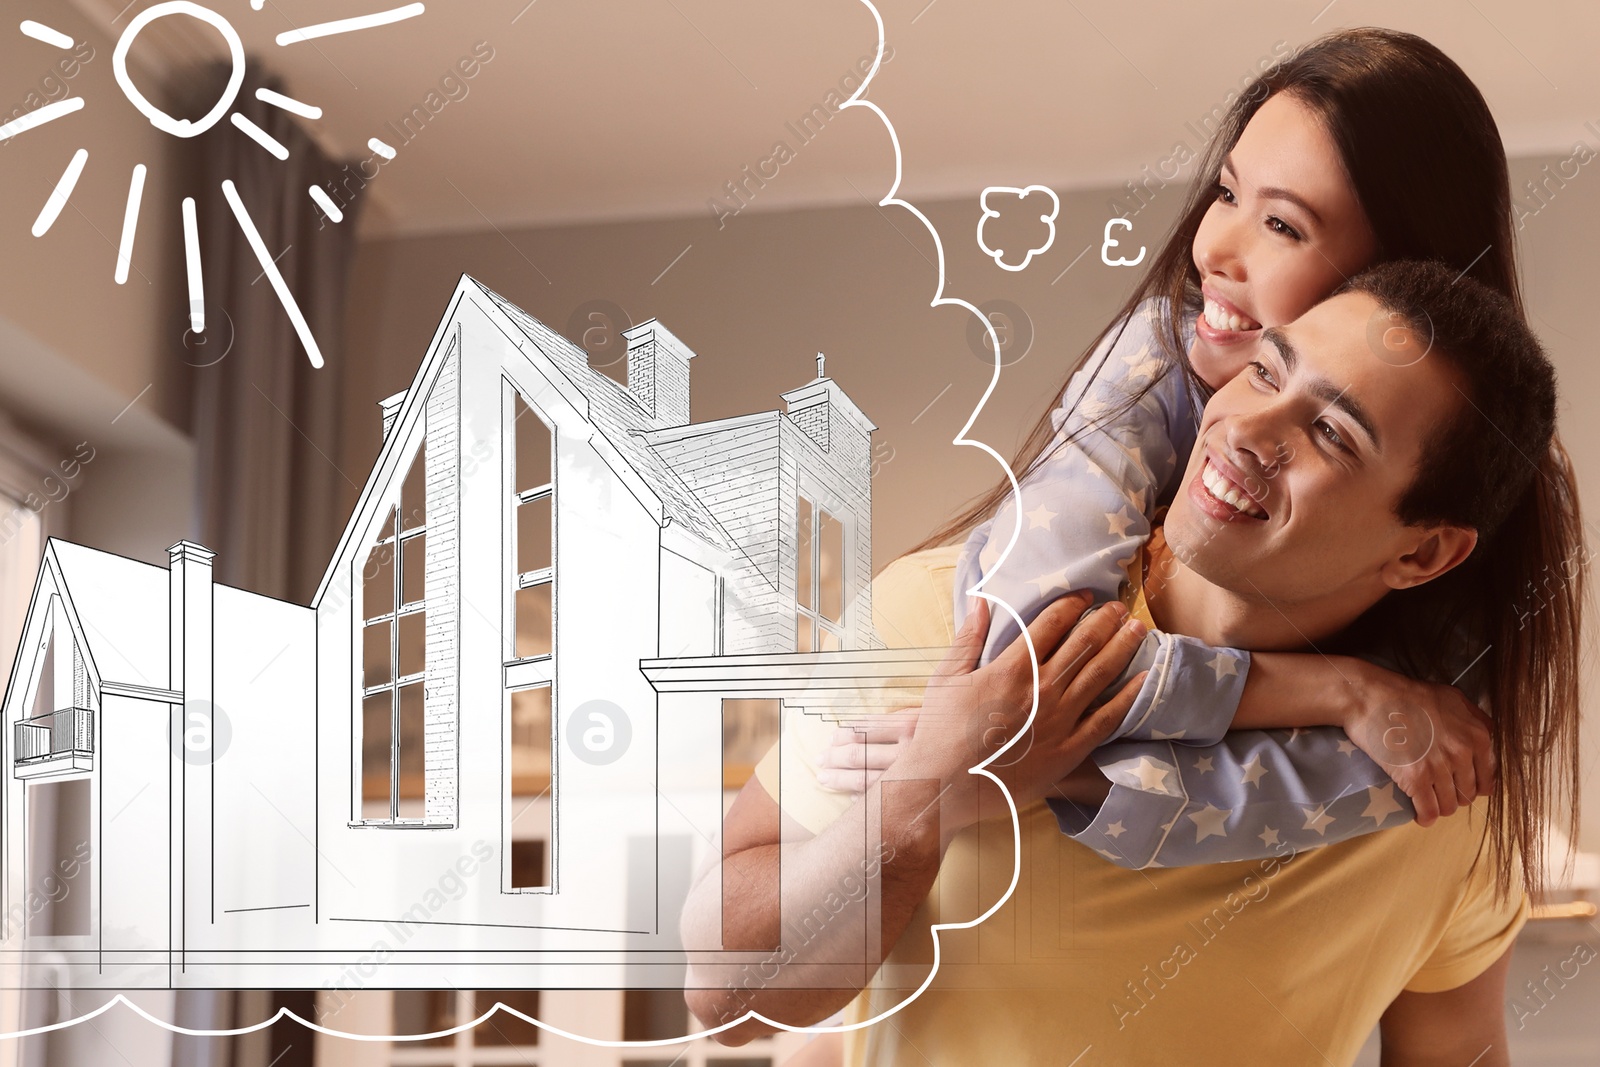 Image of Lovely interracial couple dreaming about new house. Illustration in thought bubble